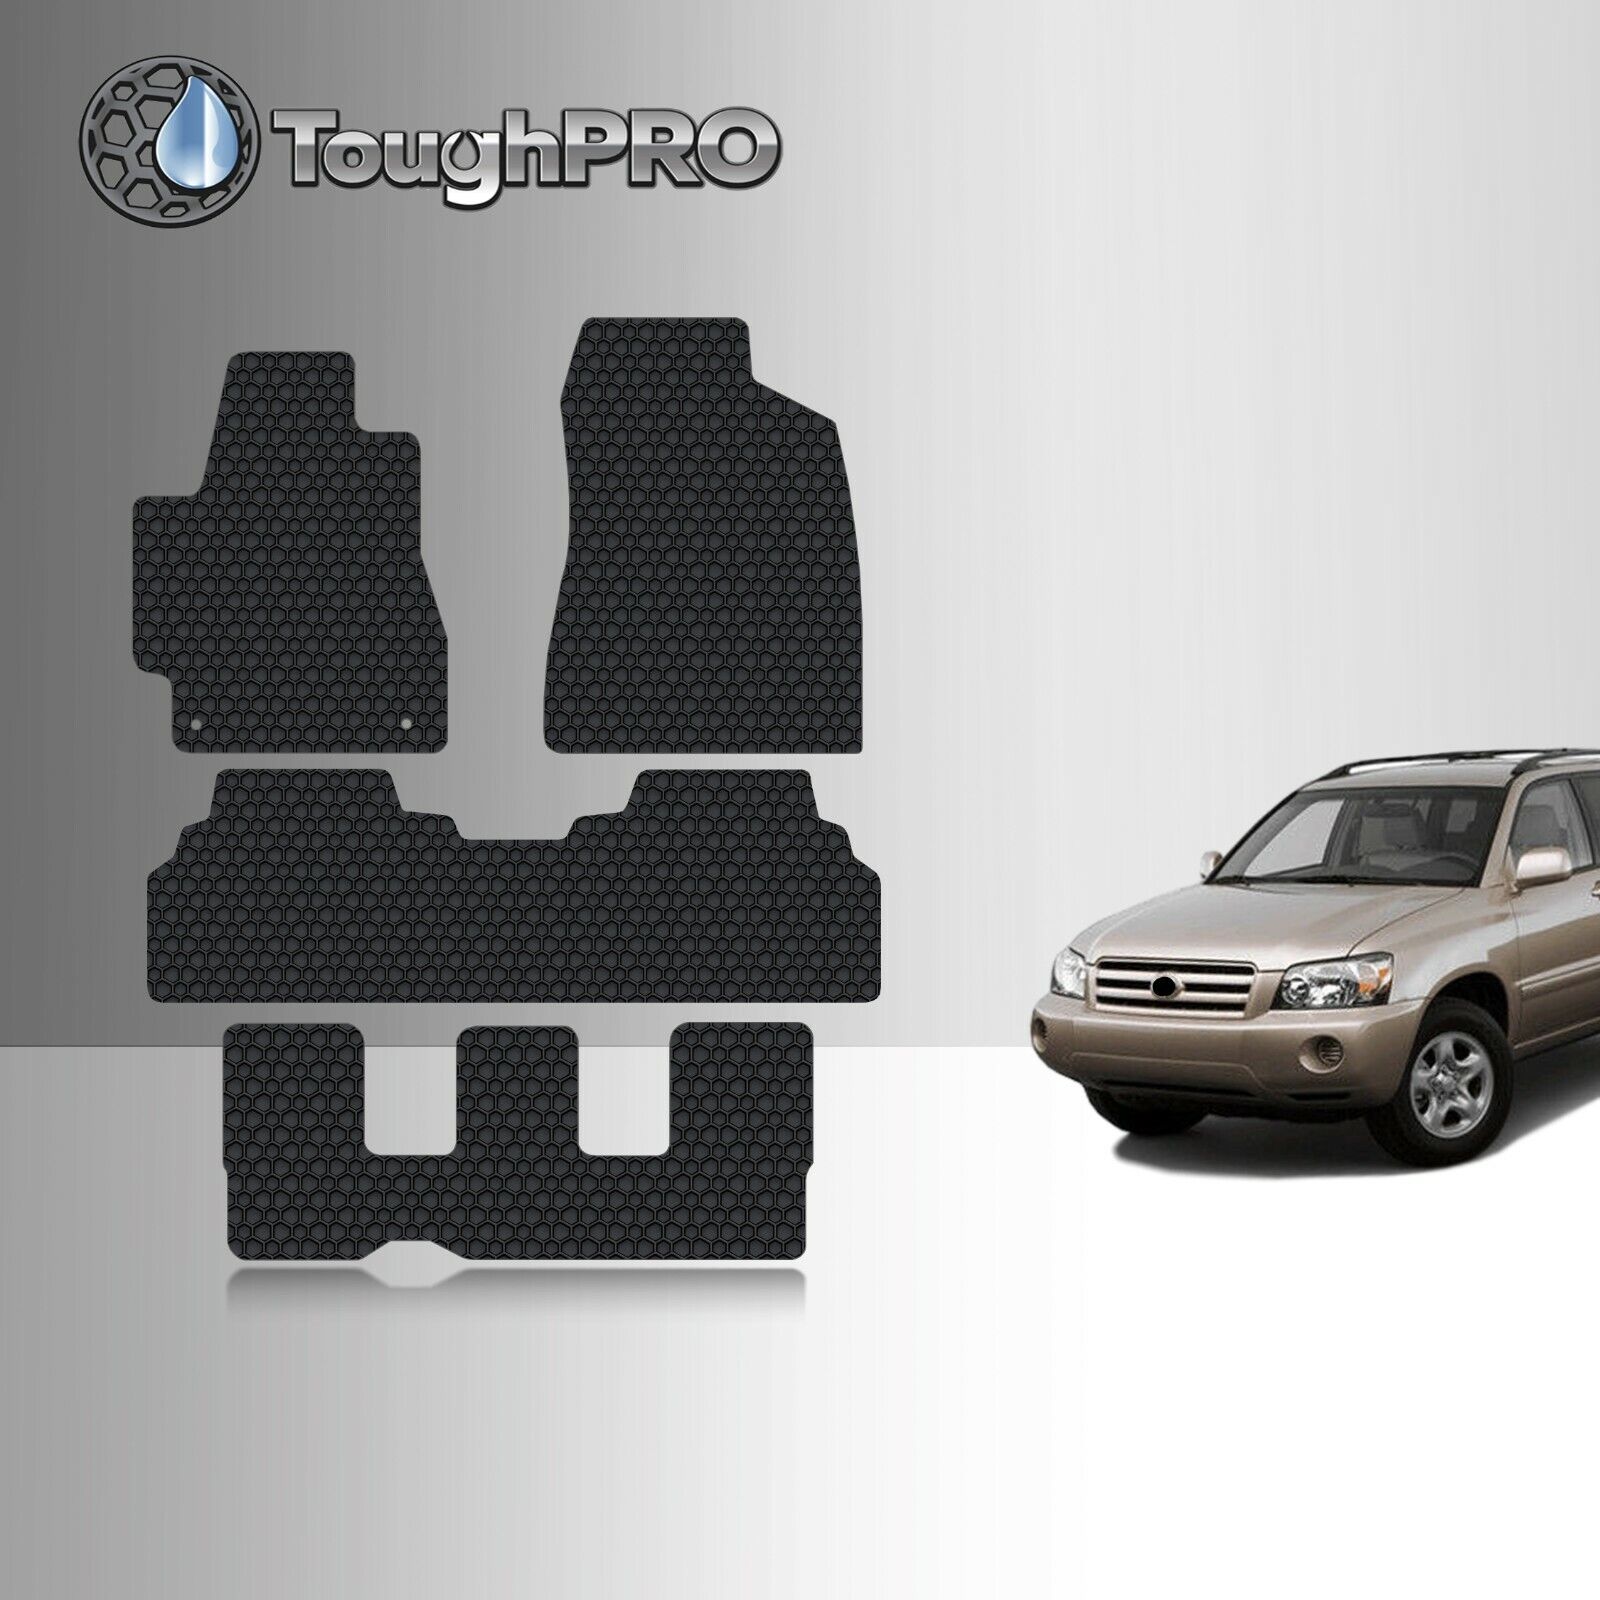 ToughPRO Floor Mats + 3rd Row Black For Toyota Highlander All Weather 2001-2007